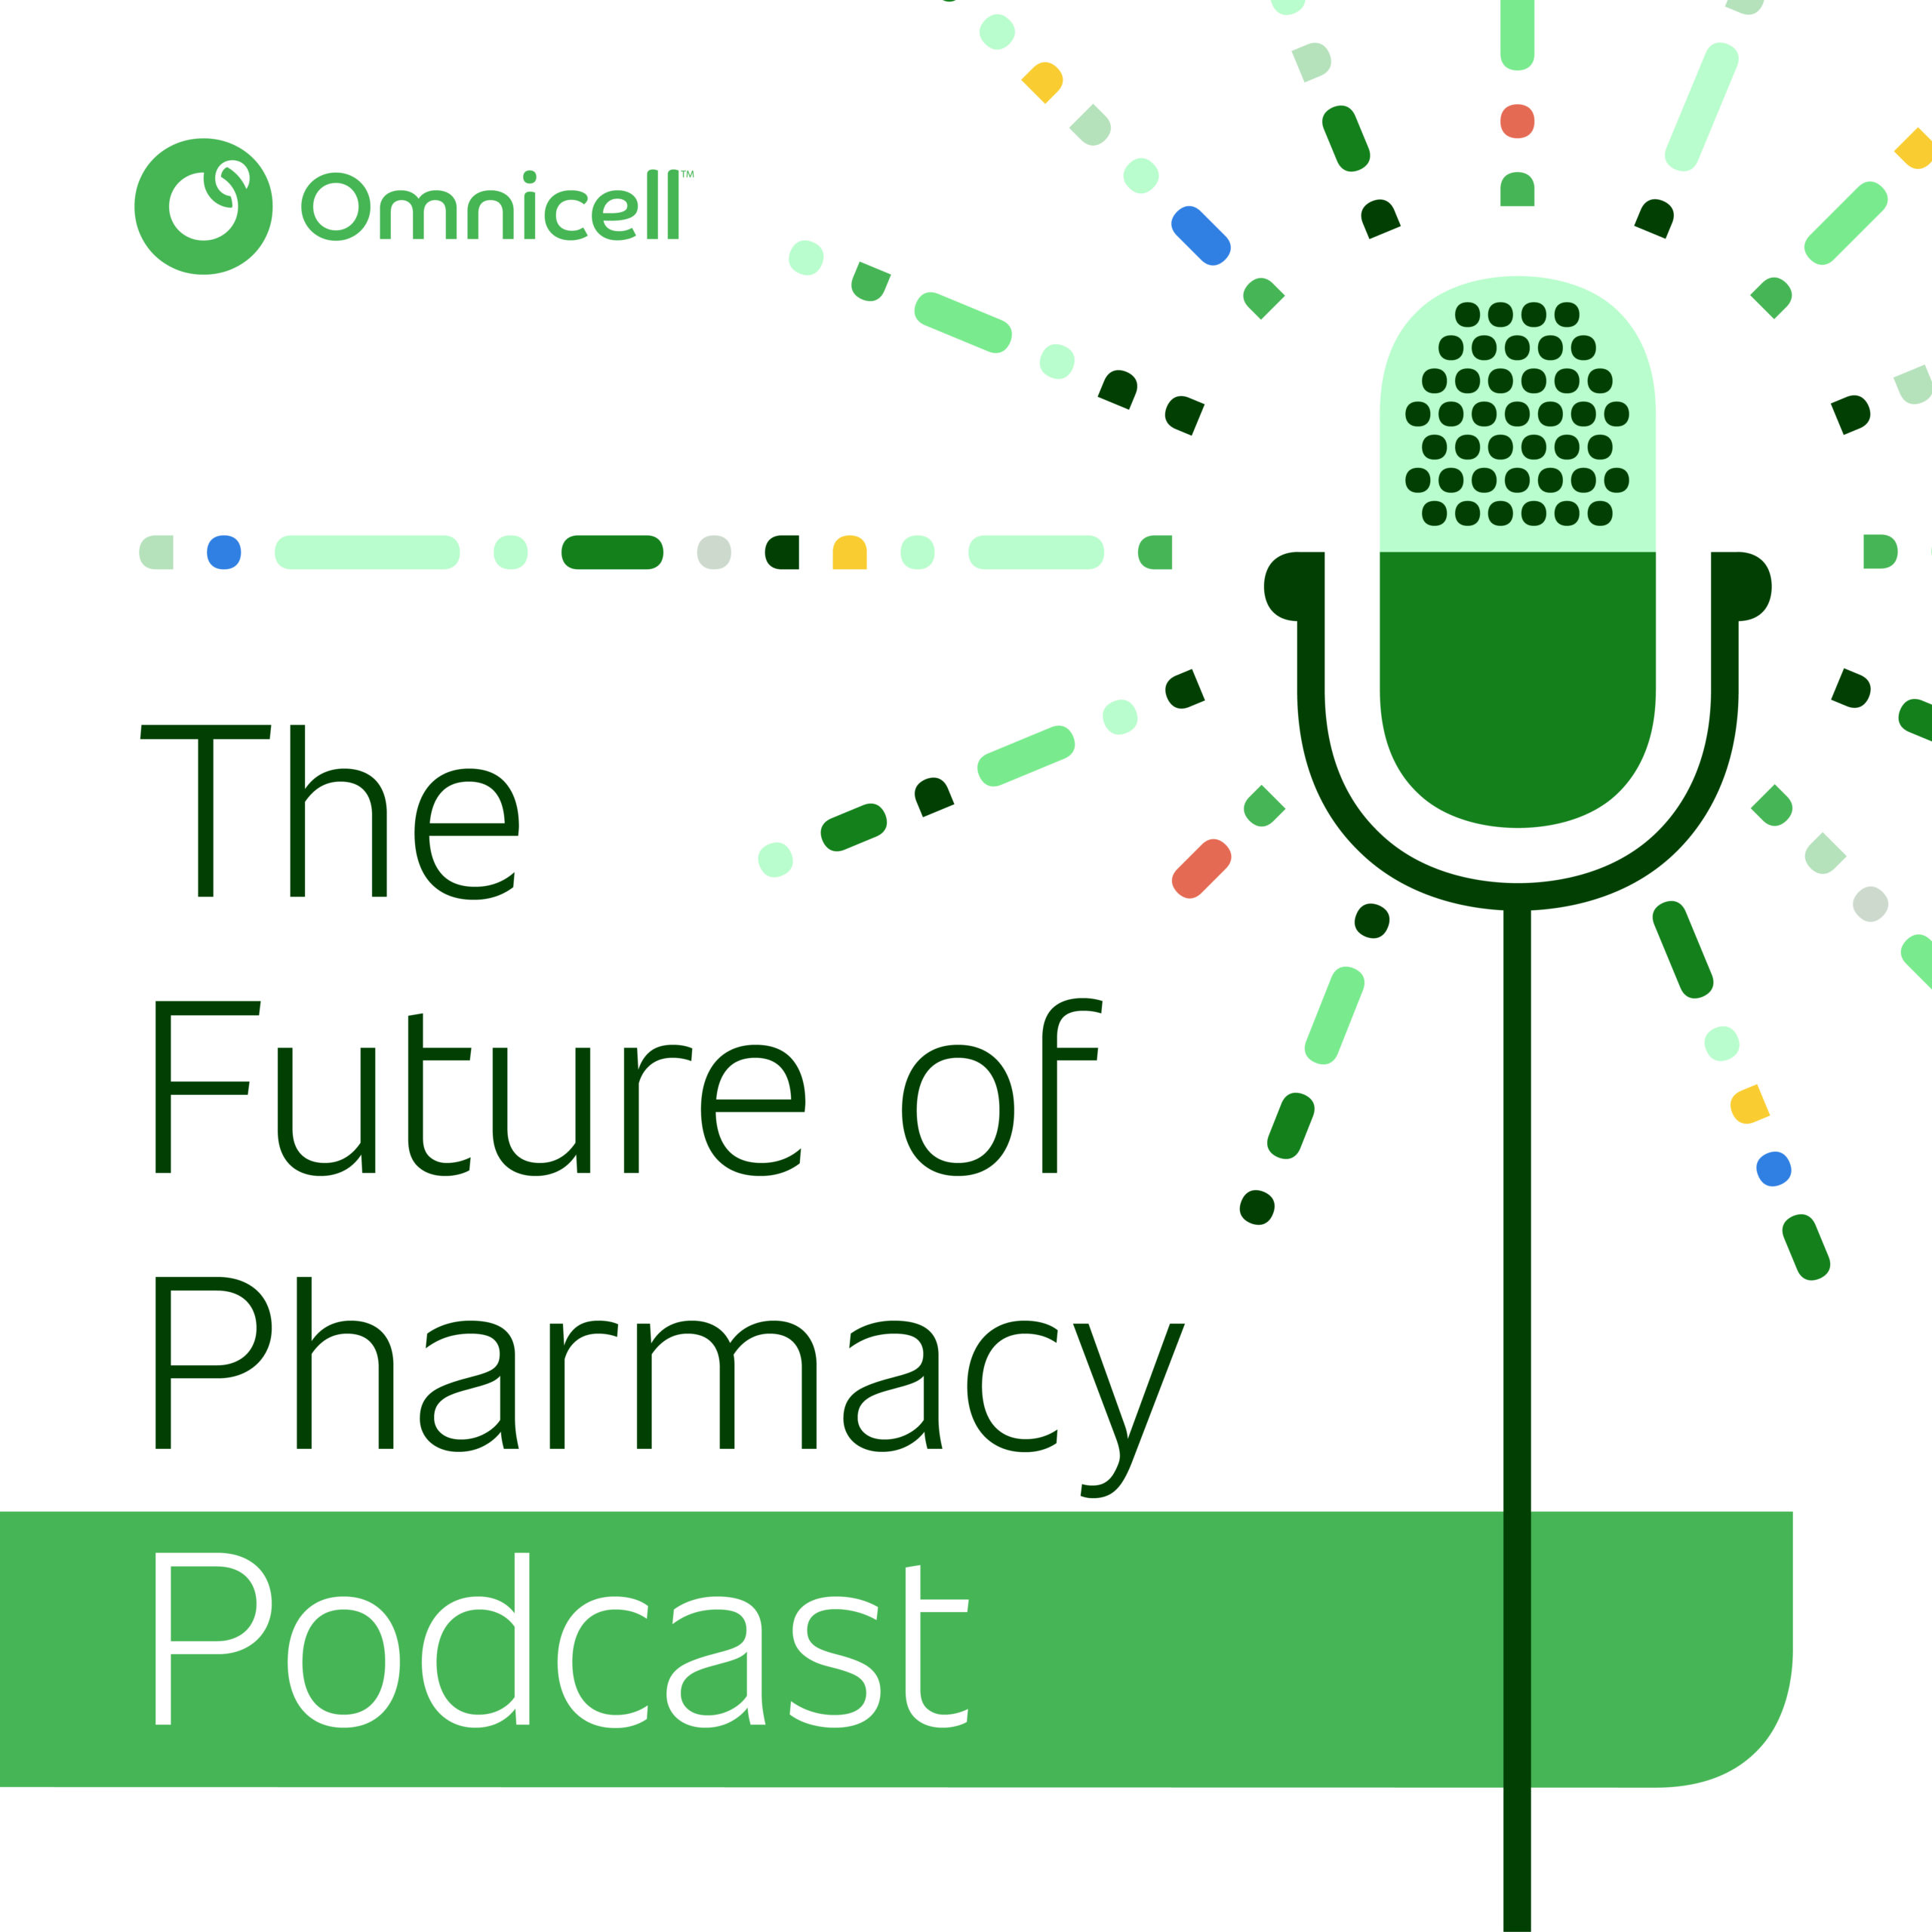 The Future of Pharmacy Podcast | Omnicell joins the Pharmacy Podcast Network